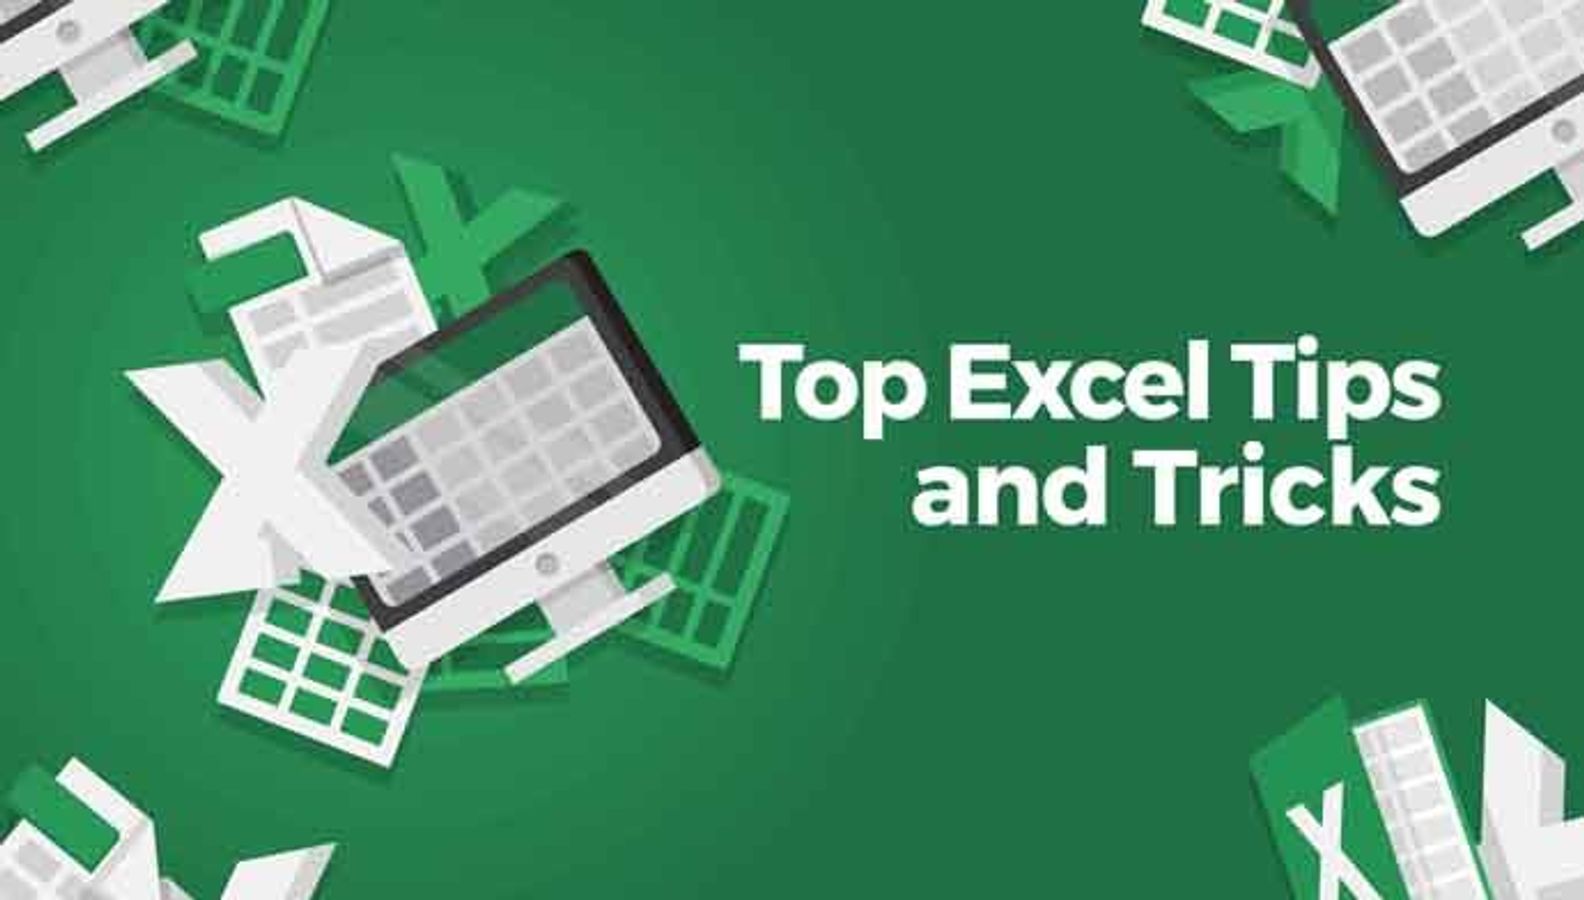 Top Excel Tips and Tricks